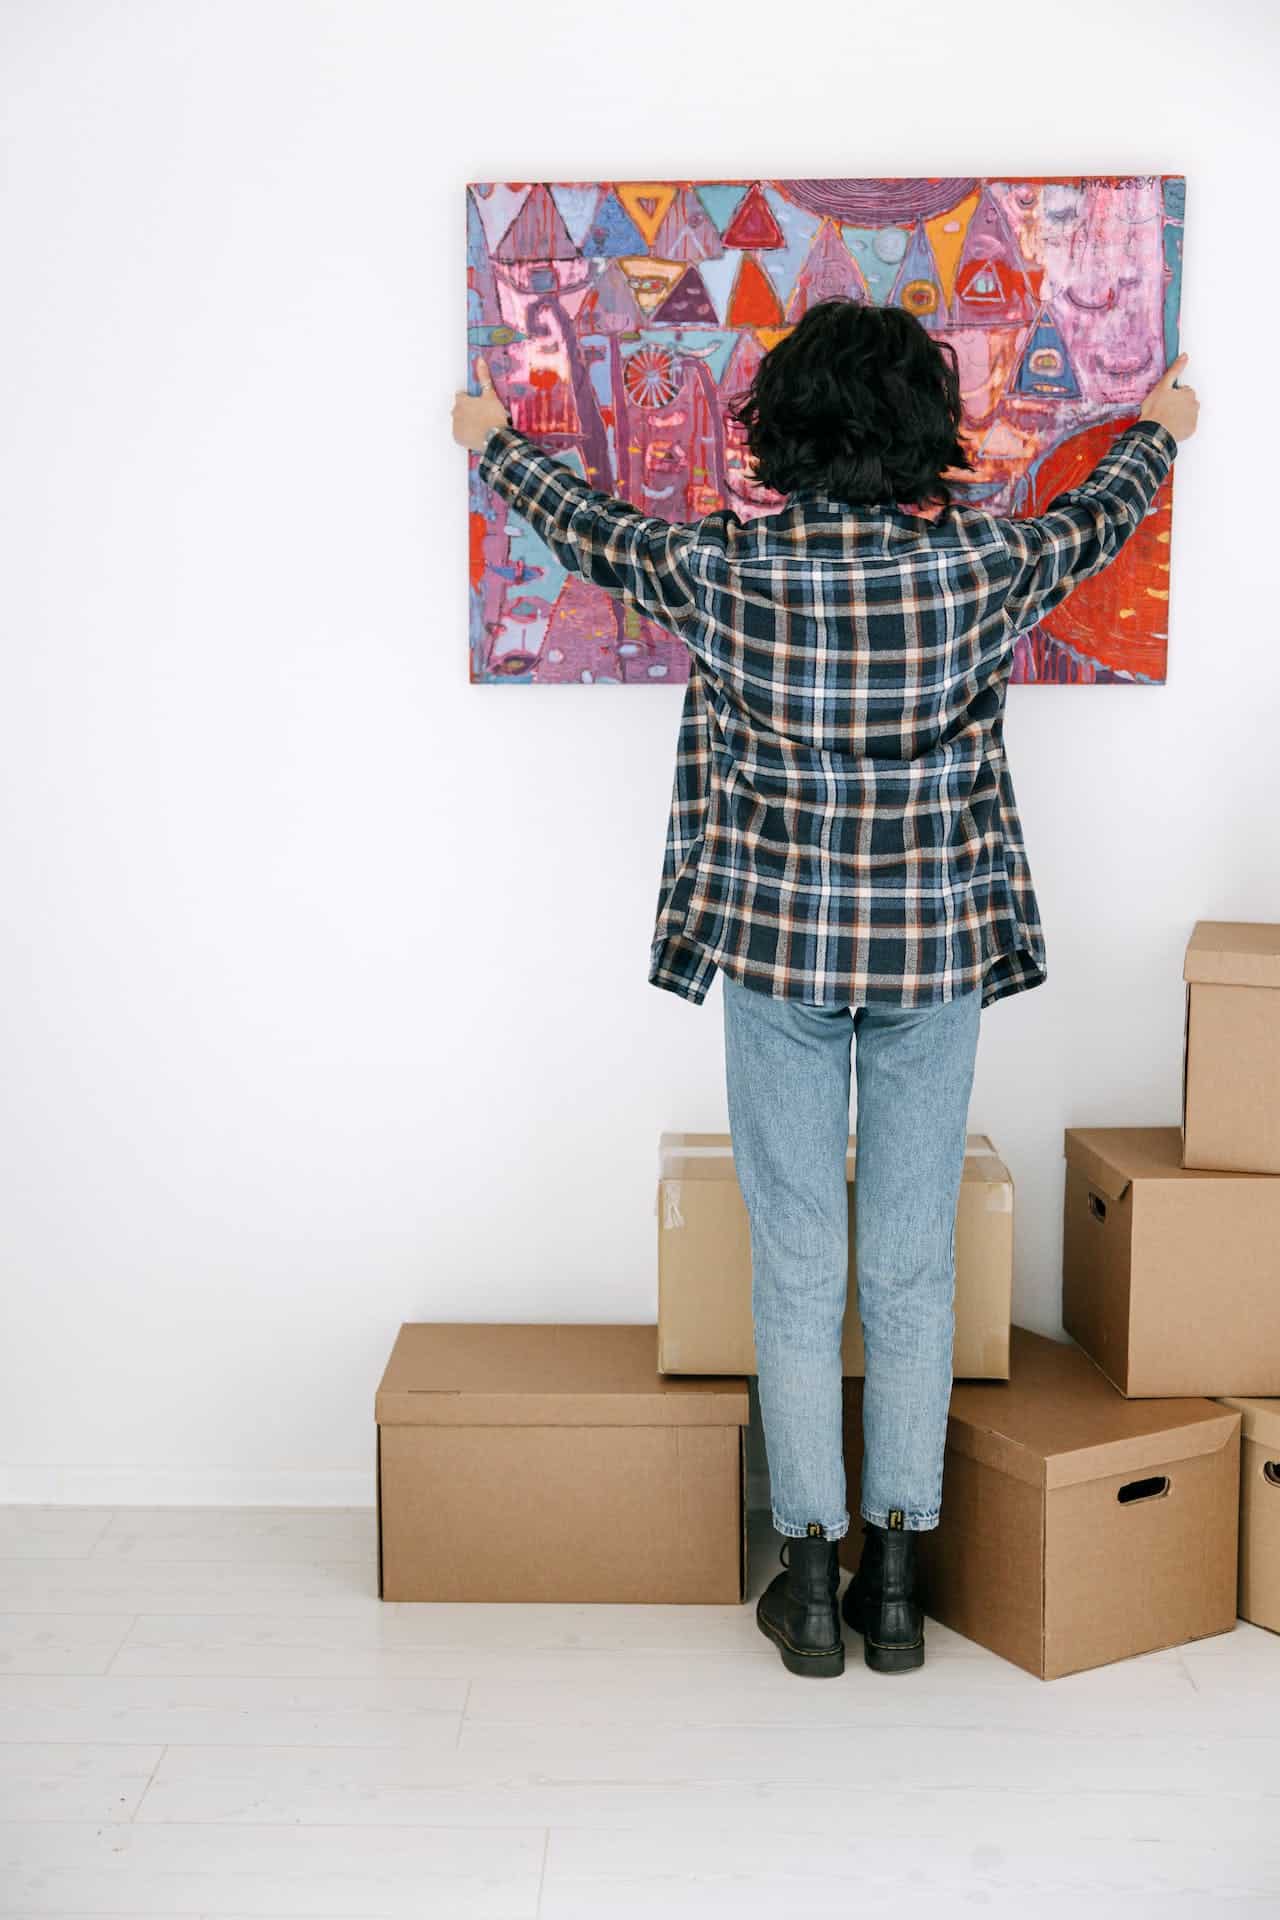 4 Things to Do When Moving Into a New Home